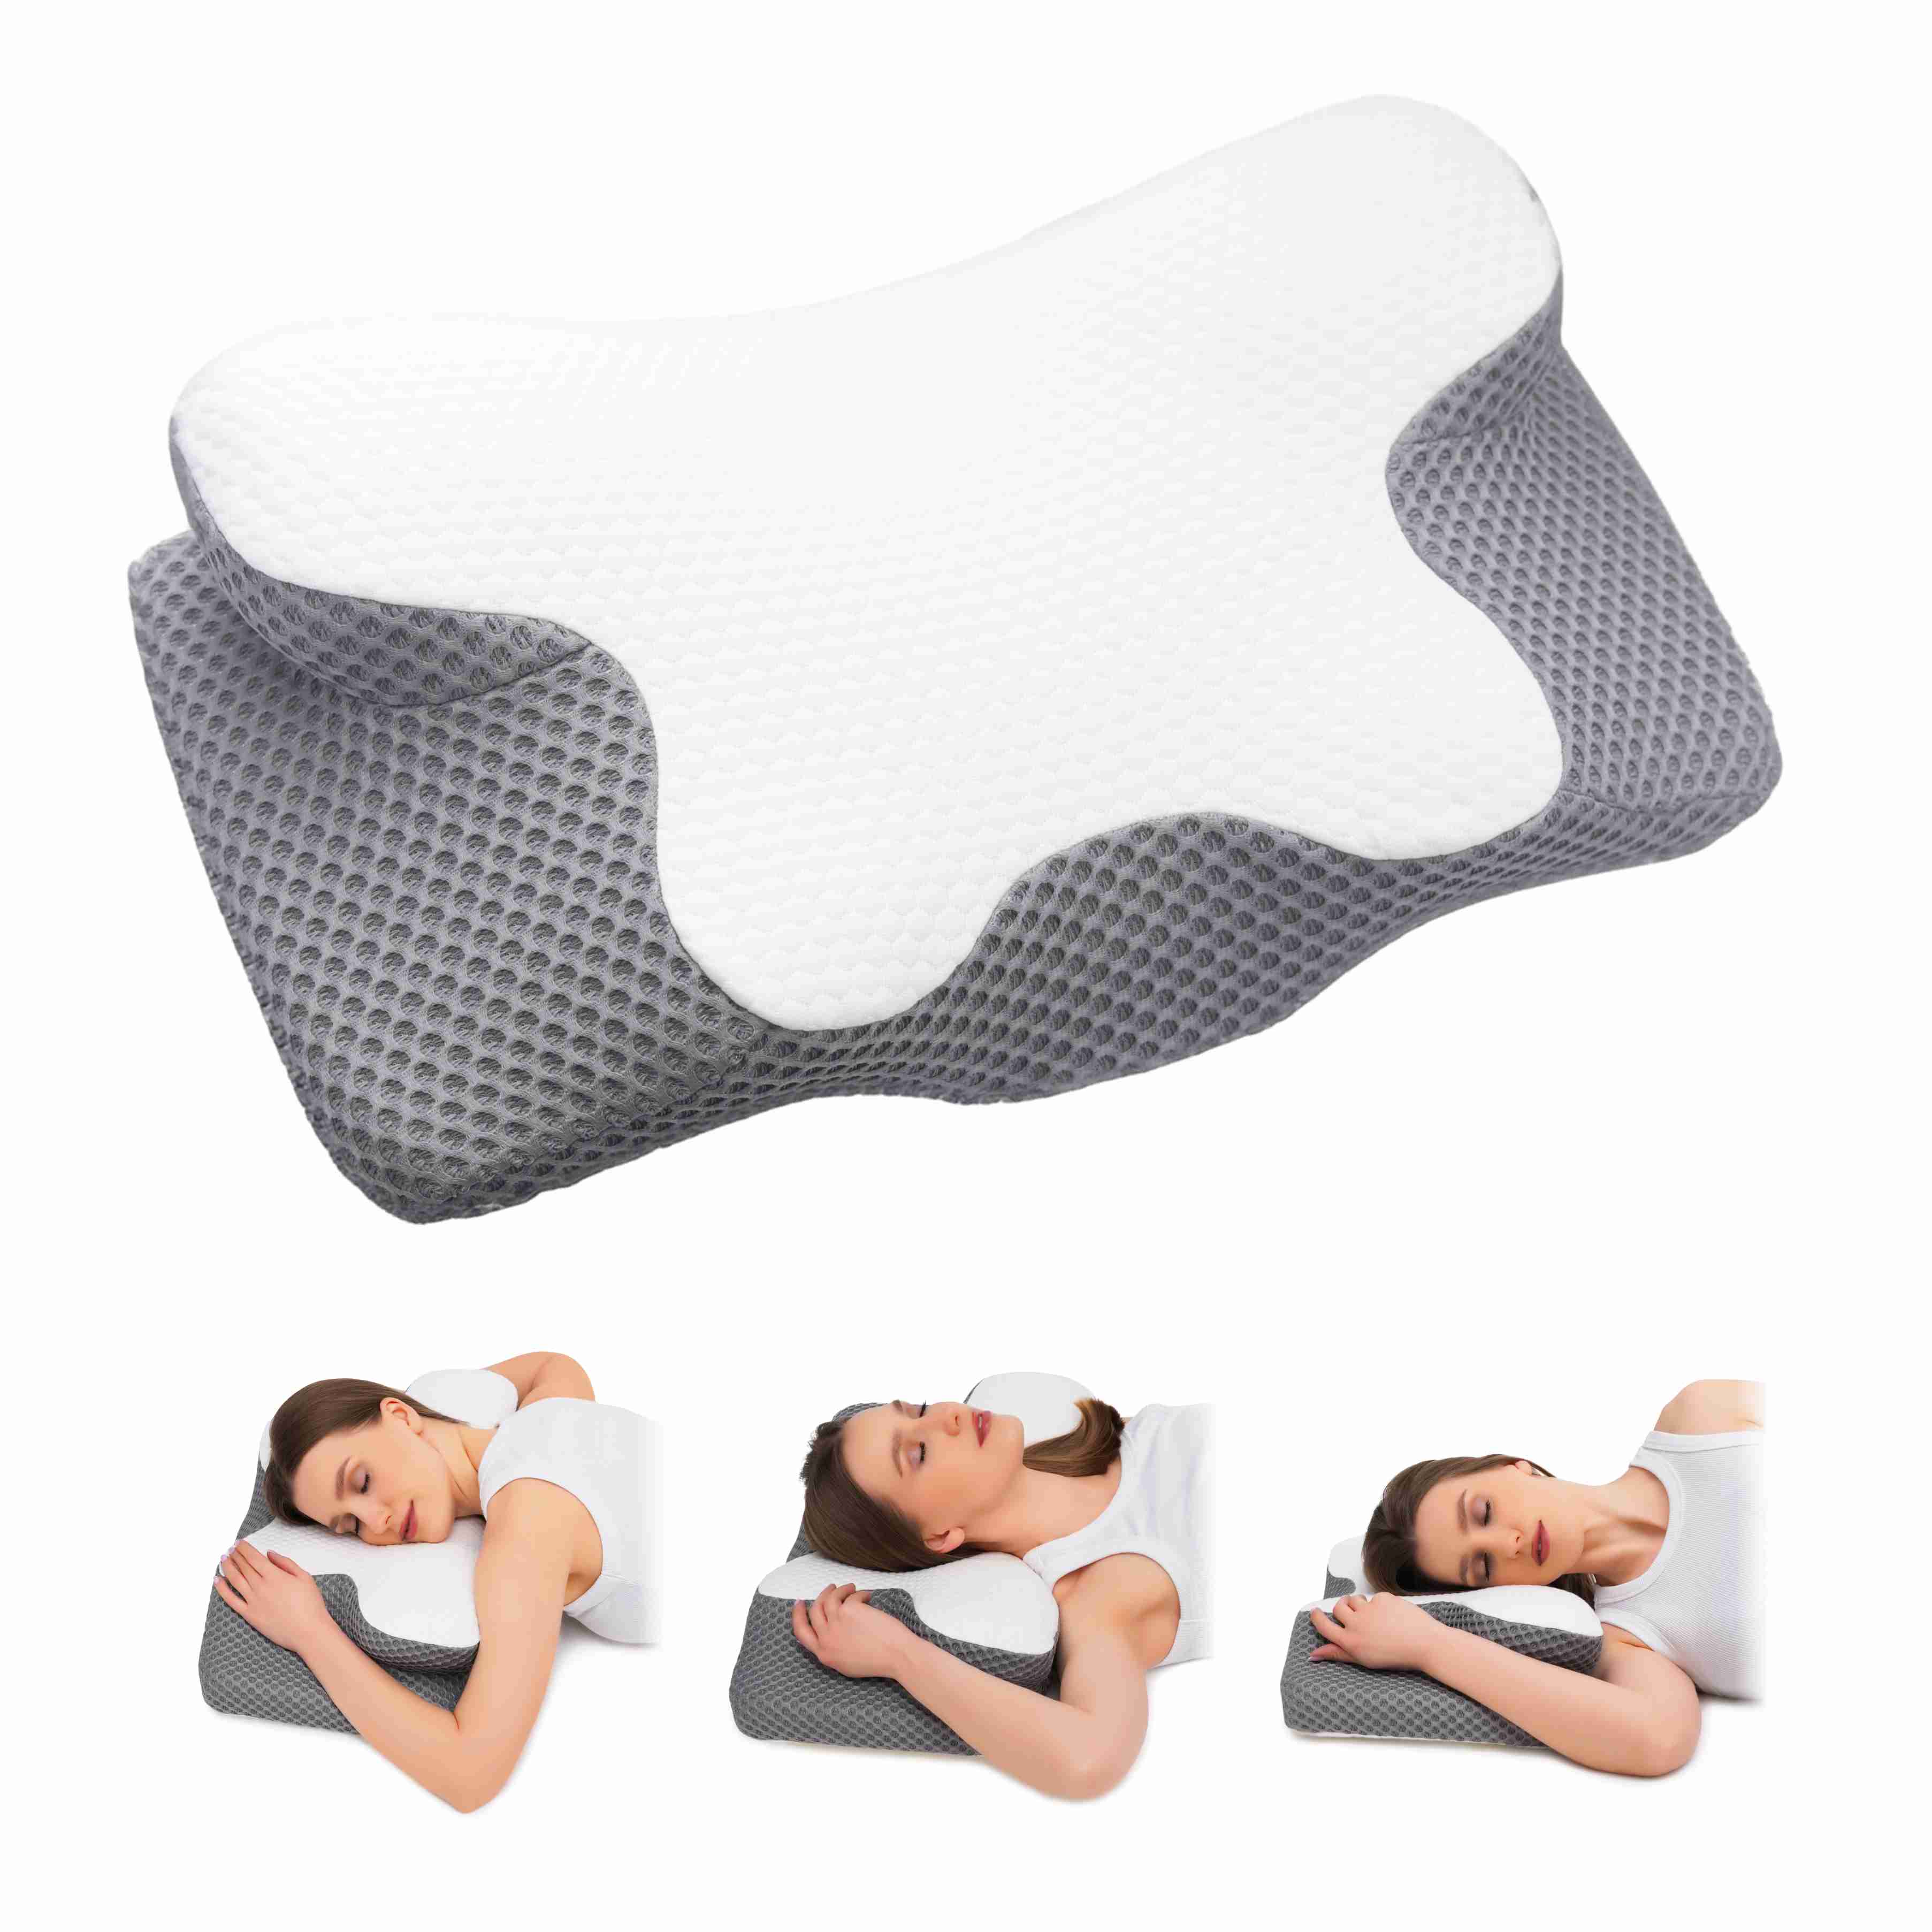 memory-foam-pillow-contour-pillows-for-neck-and-shoulder with cash back rebate